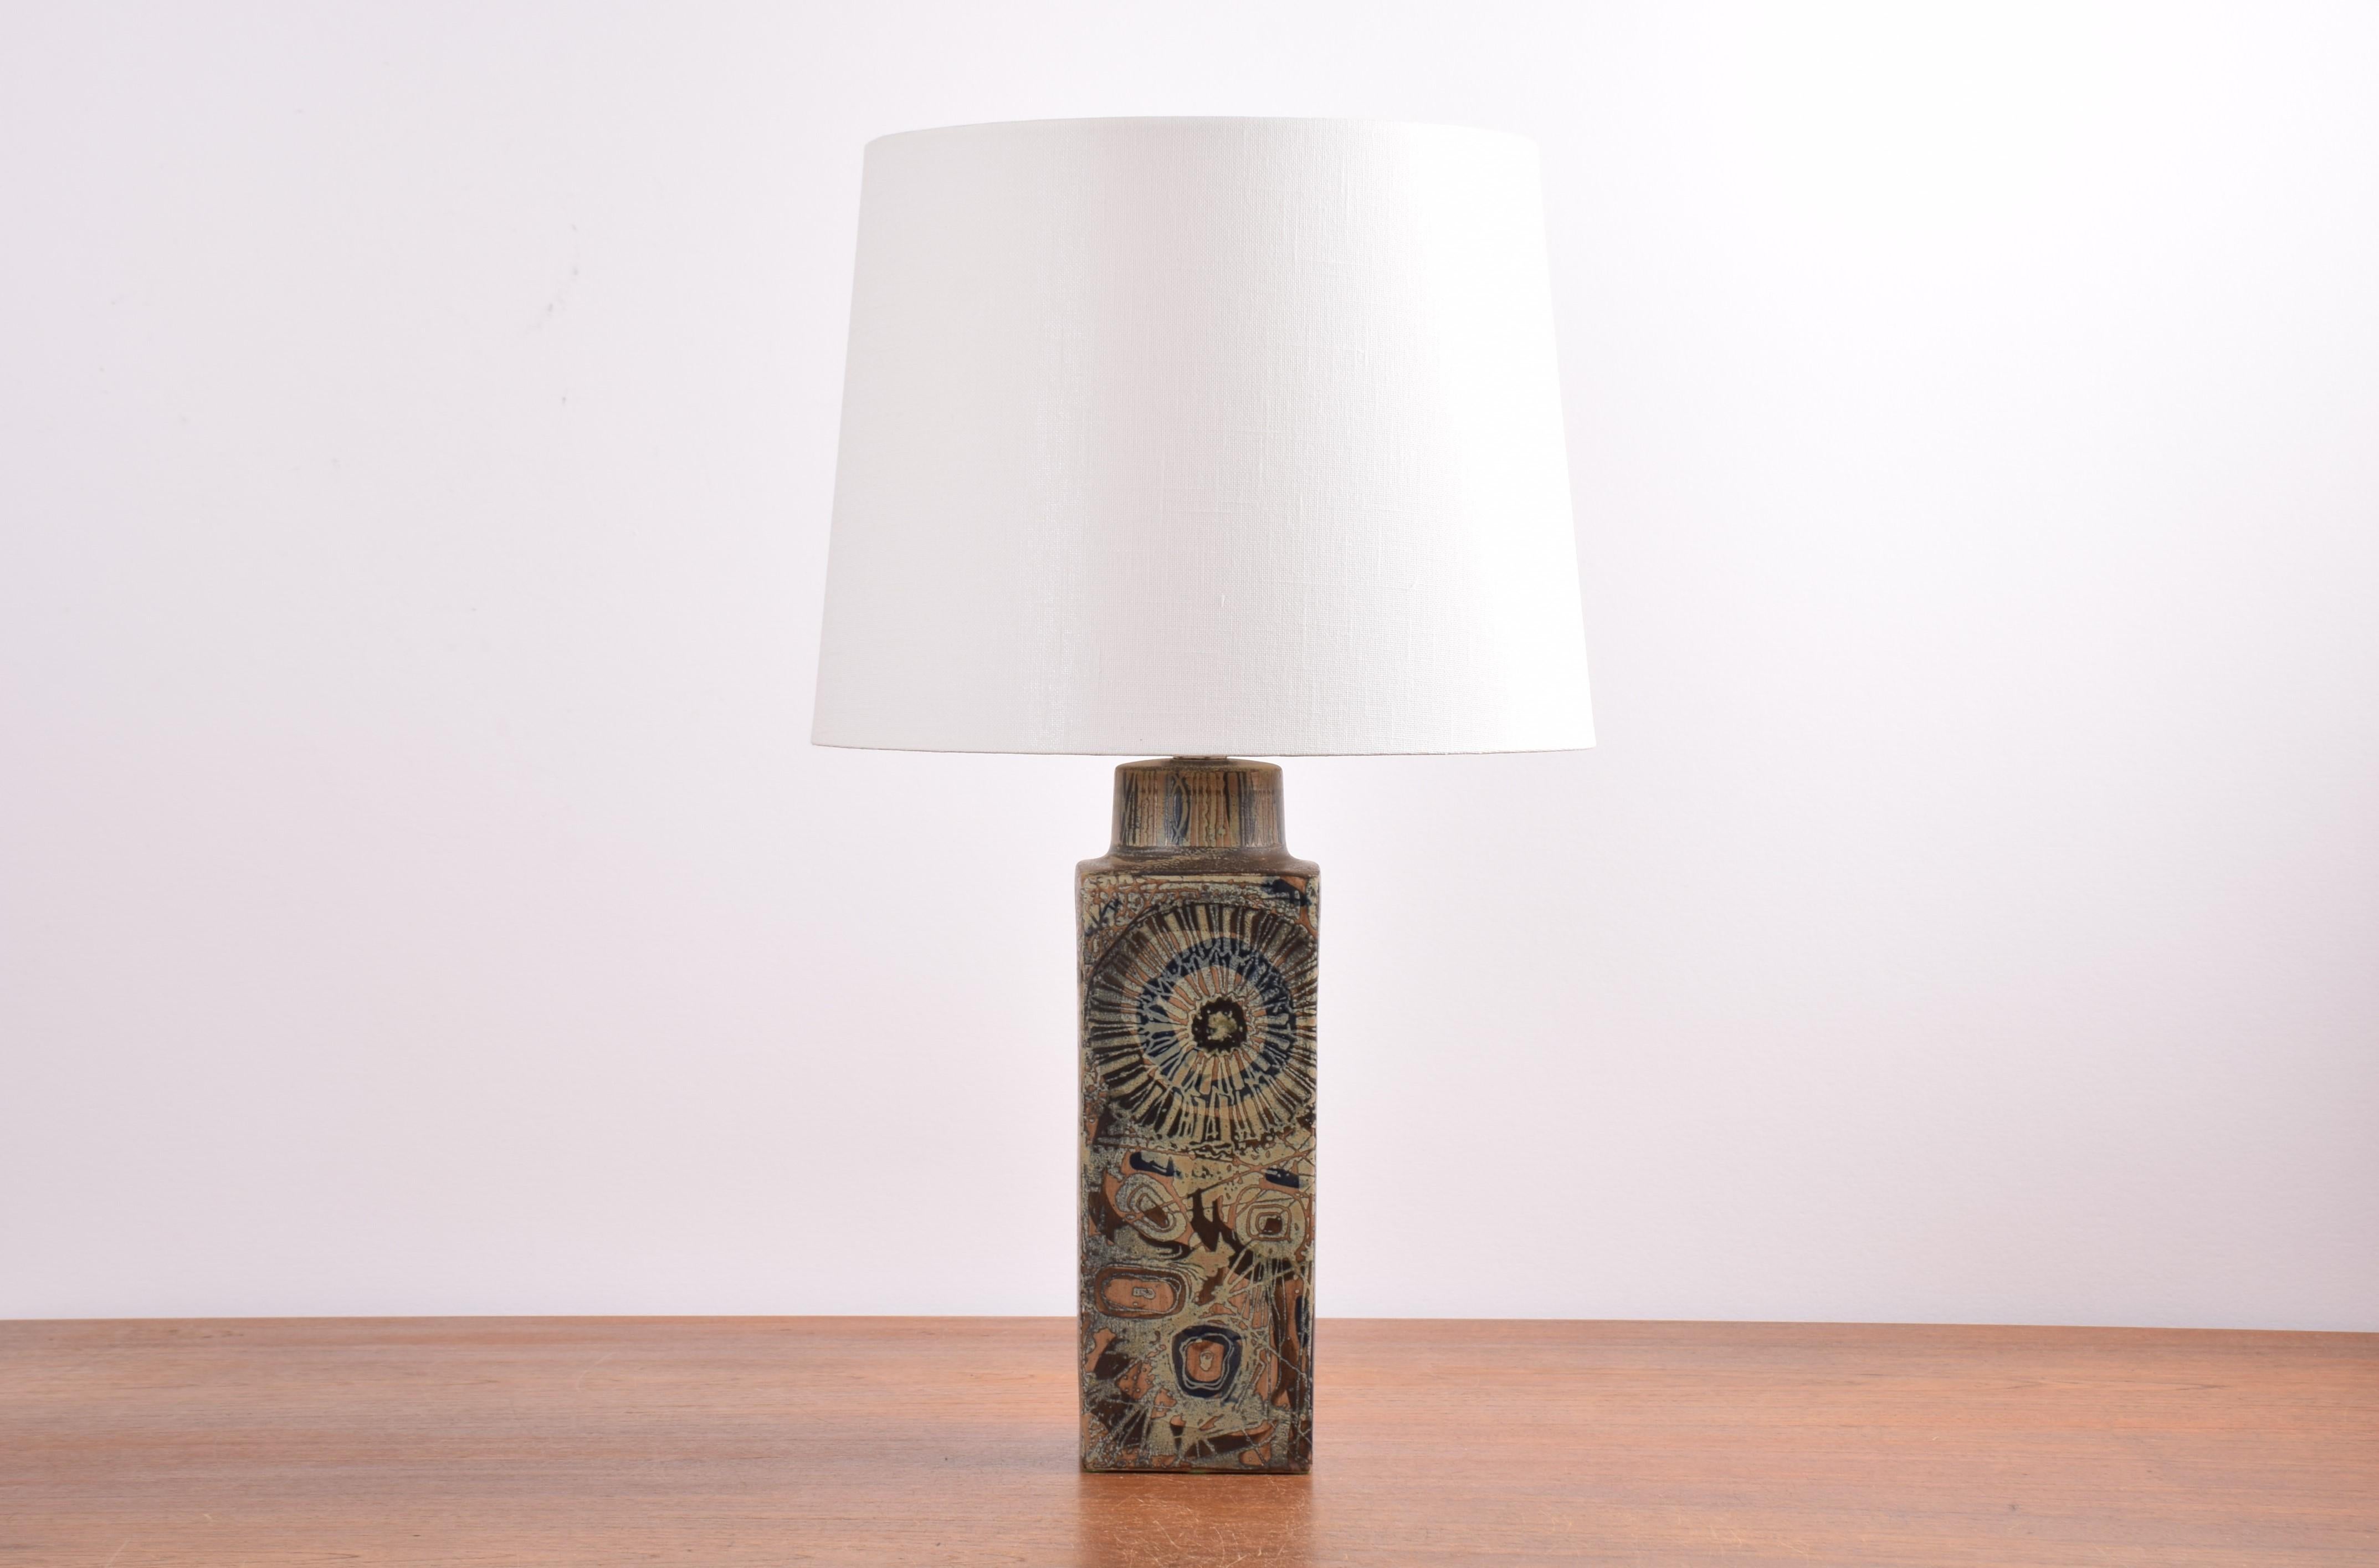 Ceramic table lamp designed by Nils Thorsson for Royal Copenhagen and Fog & Mørup and made circa 1970s.
It features an abstract floral decor in brown and blue matte glaze. The suraface is tactile.

Included is a new lampshade designed and made in